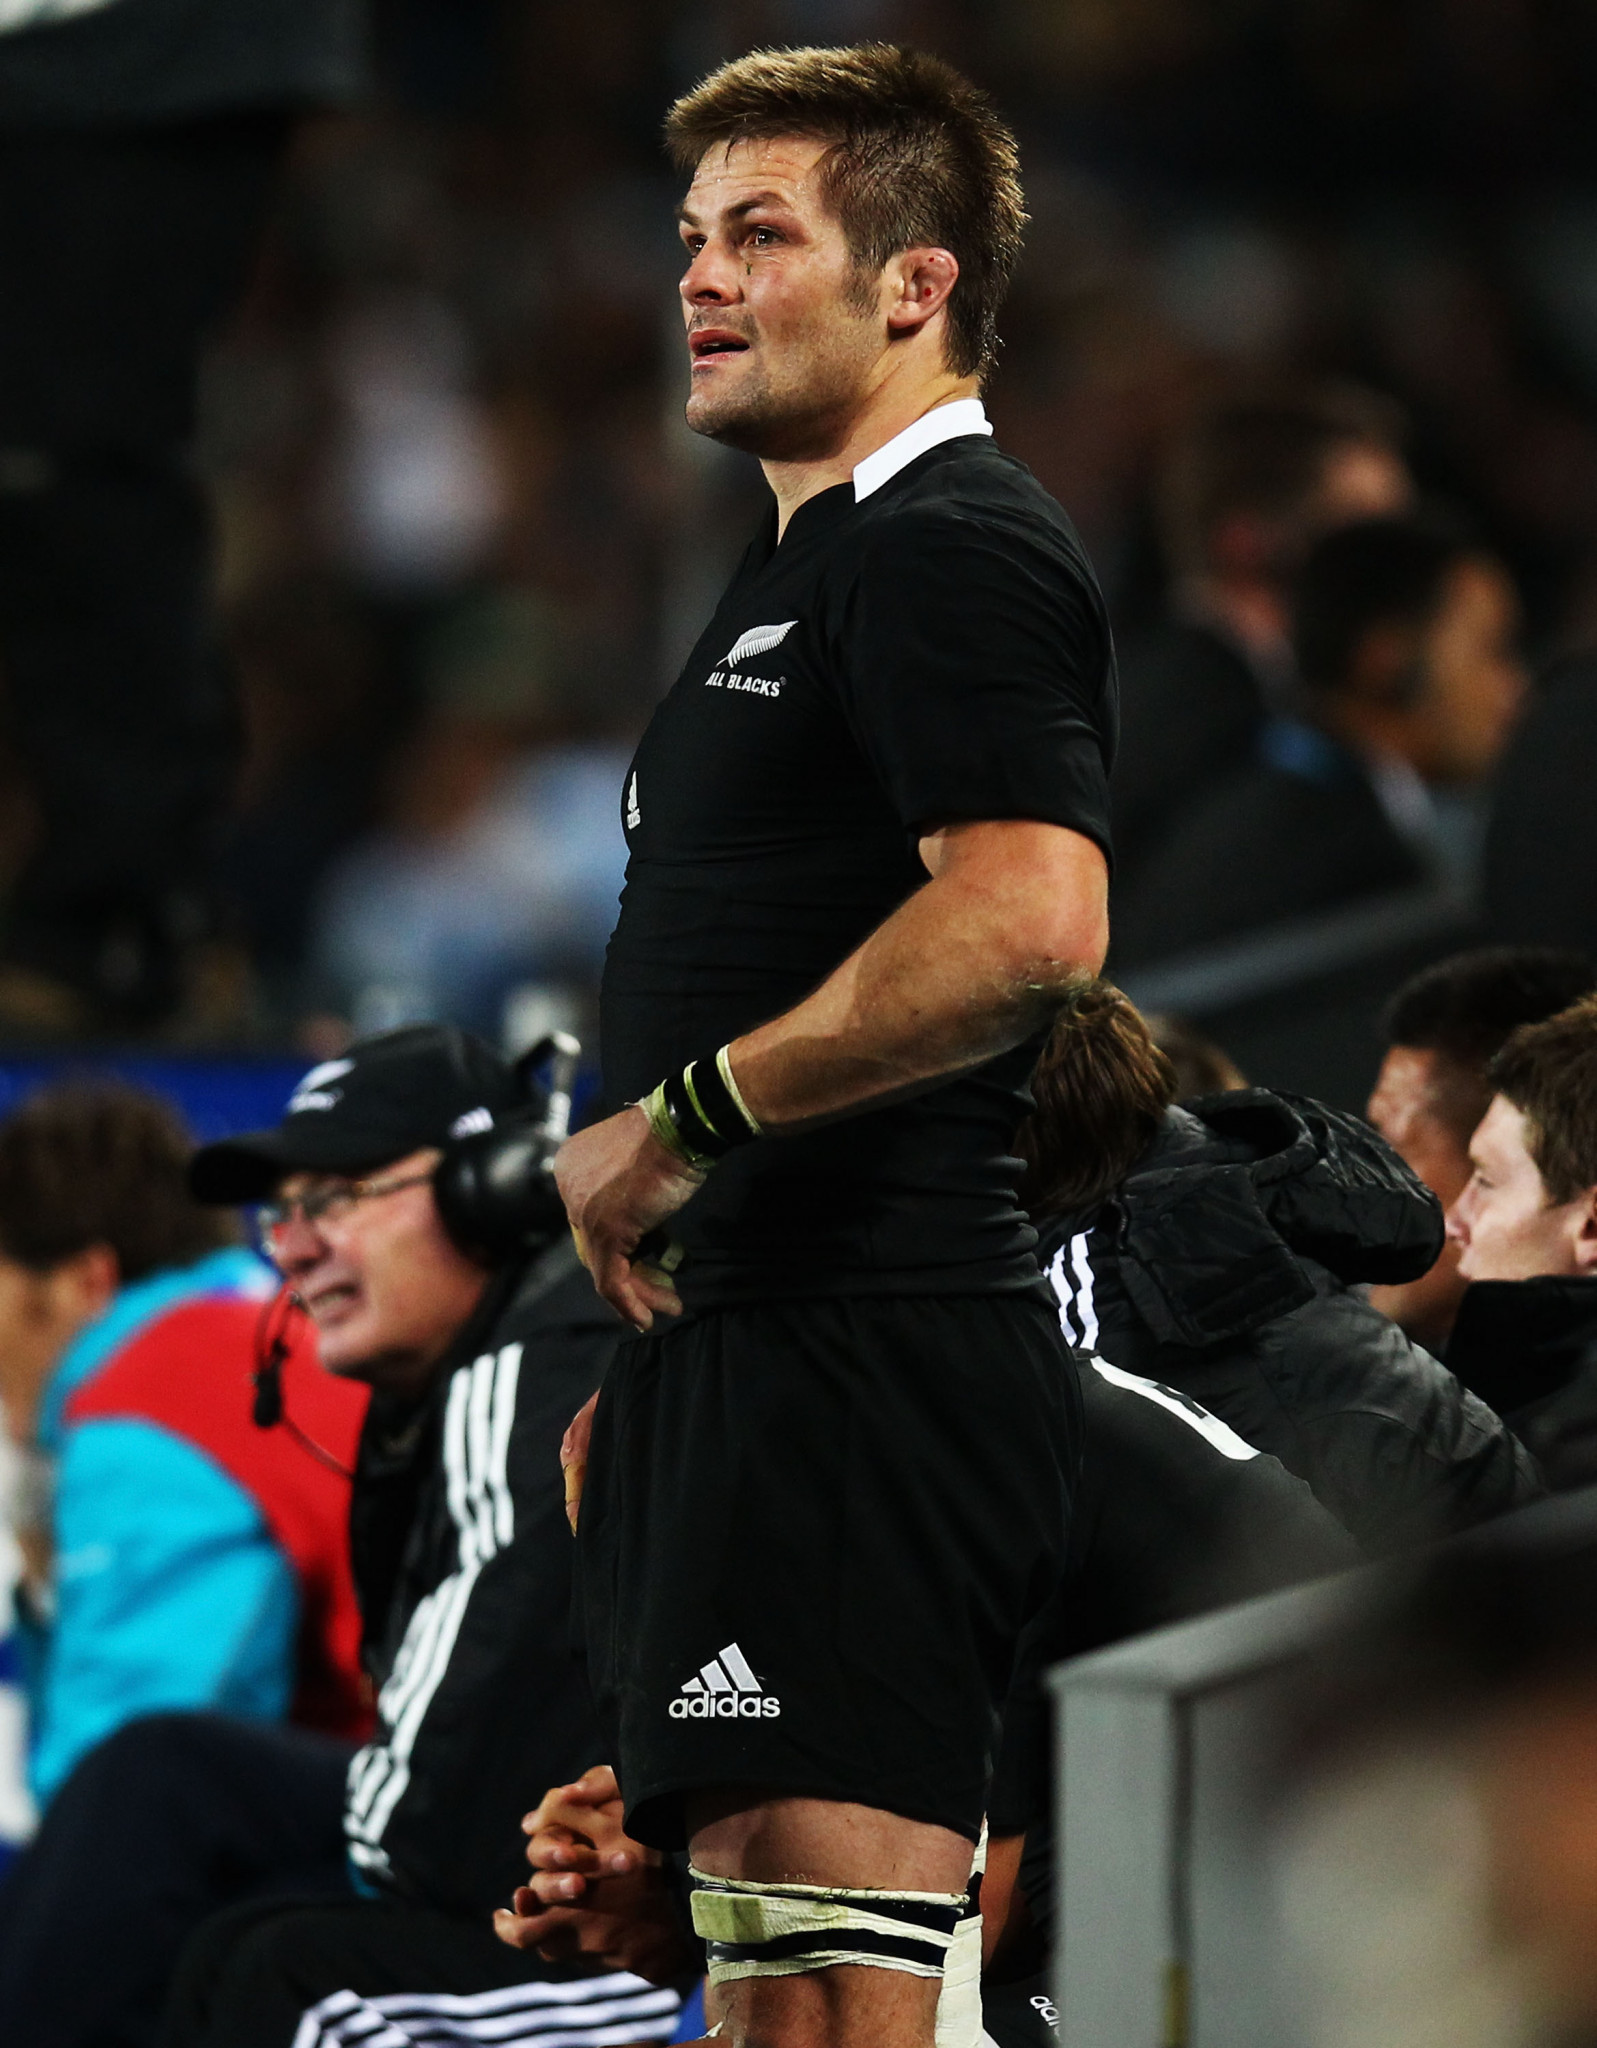 Richie McCaw is among the Hall of Fame class ©Getty Images